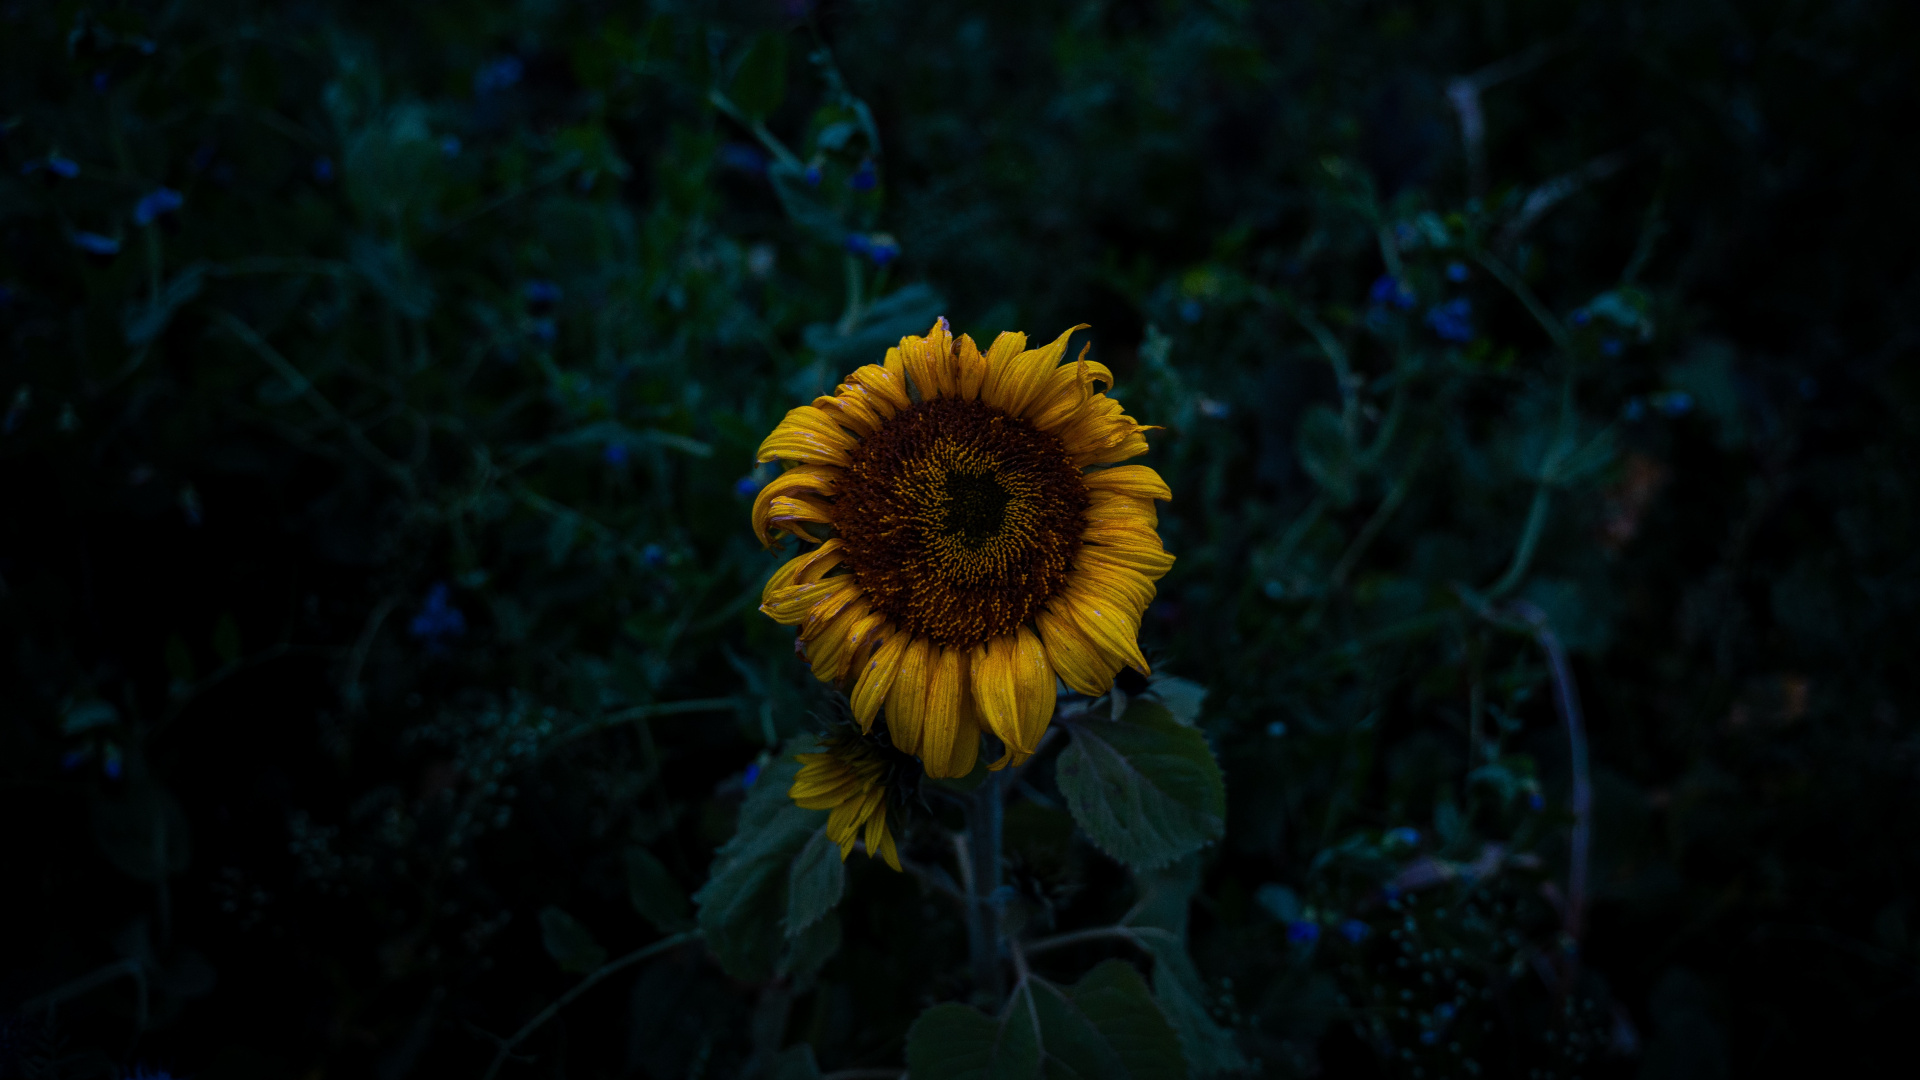 Yellow Sunflower in Bloom During Daytime. Wallpaper in 1920x1080 Resolution